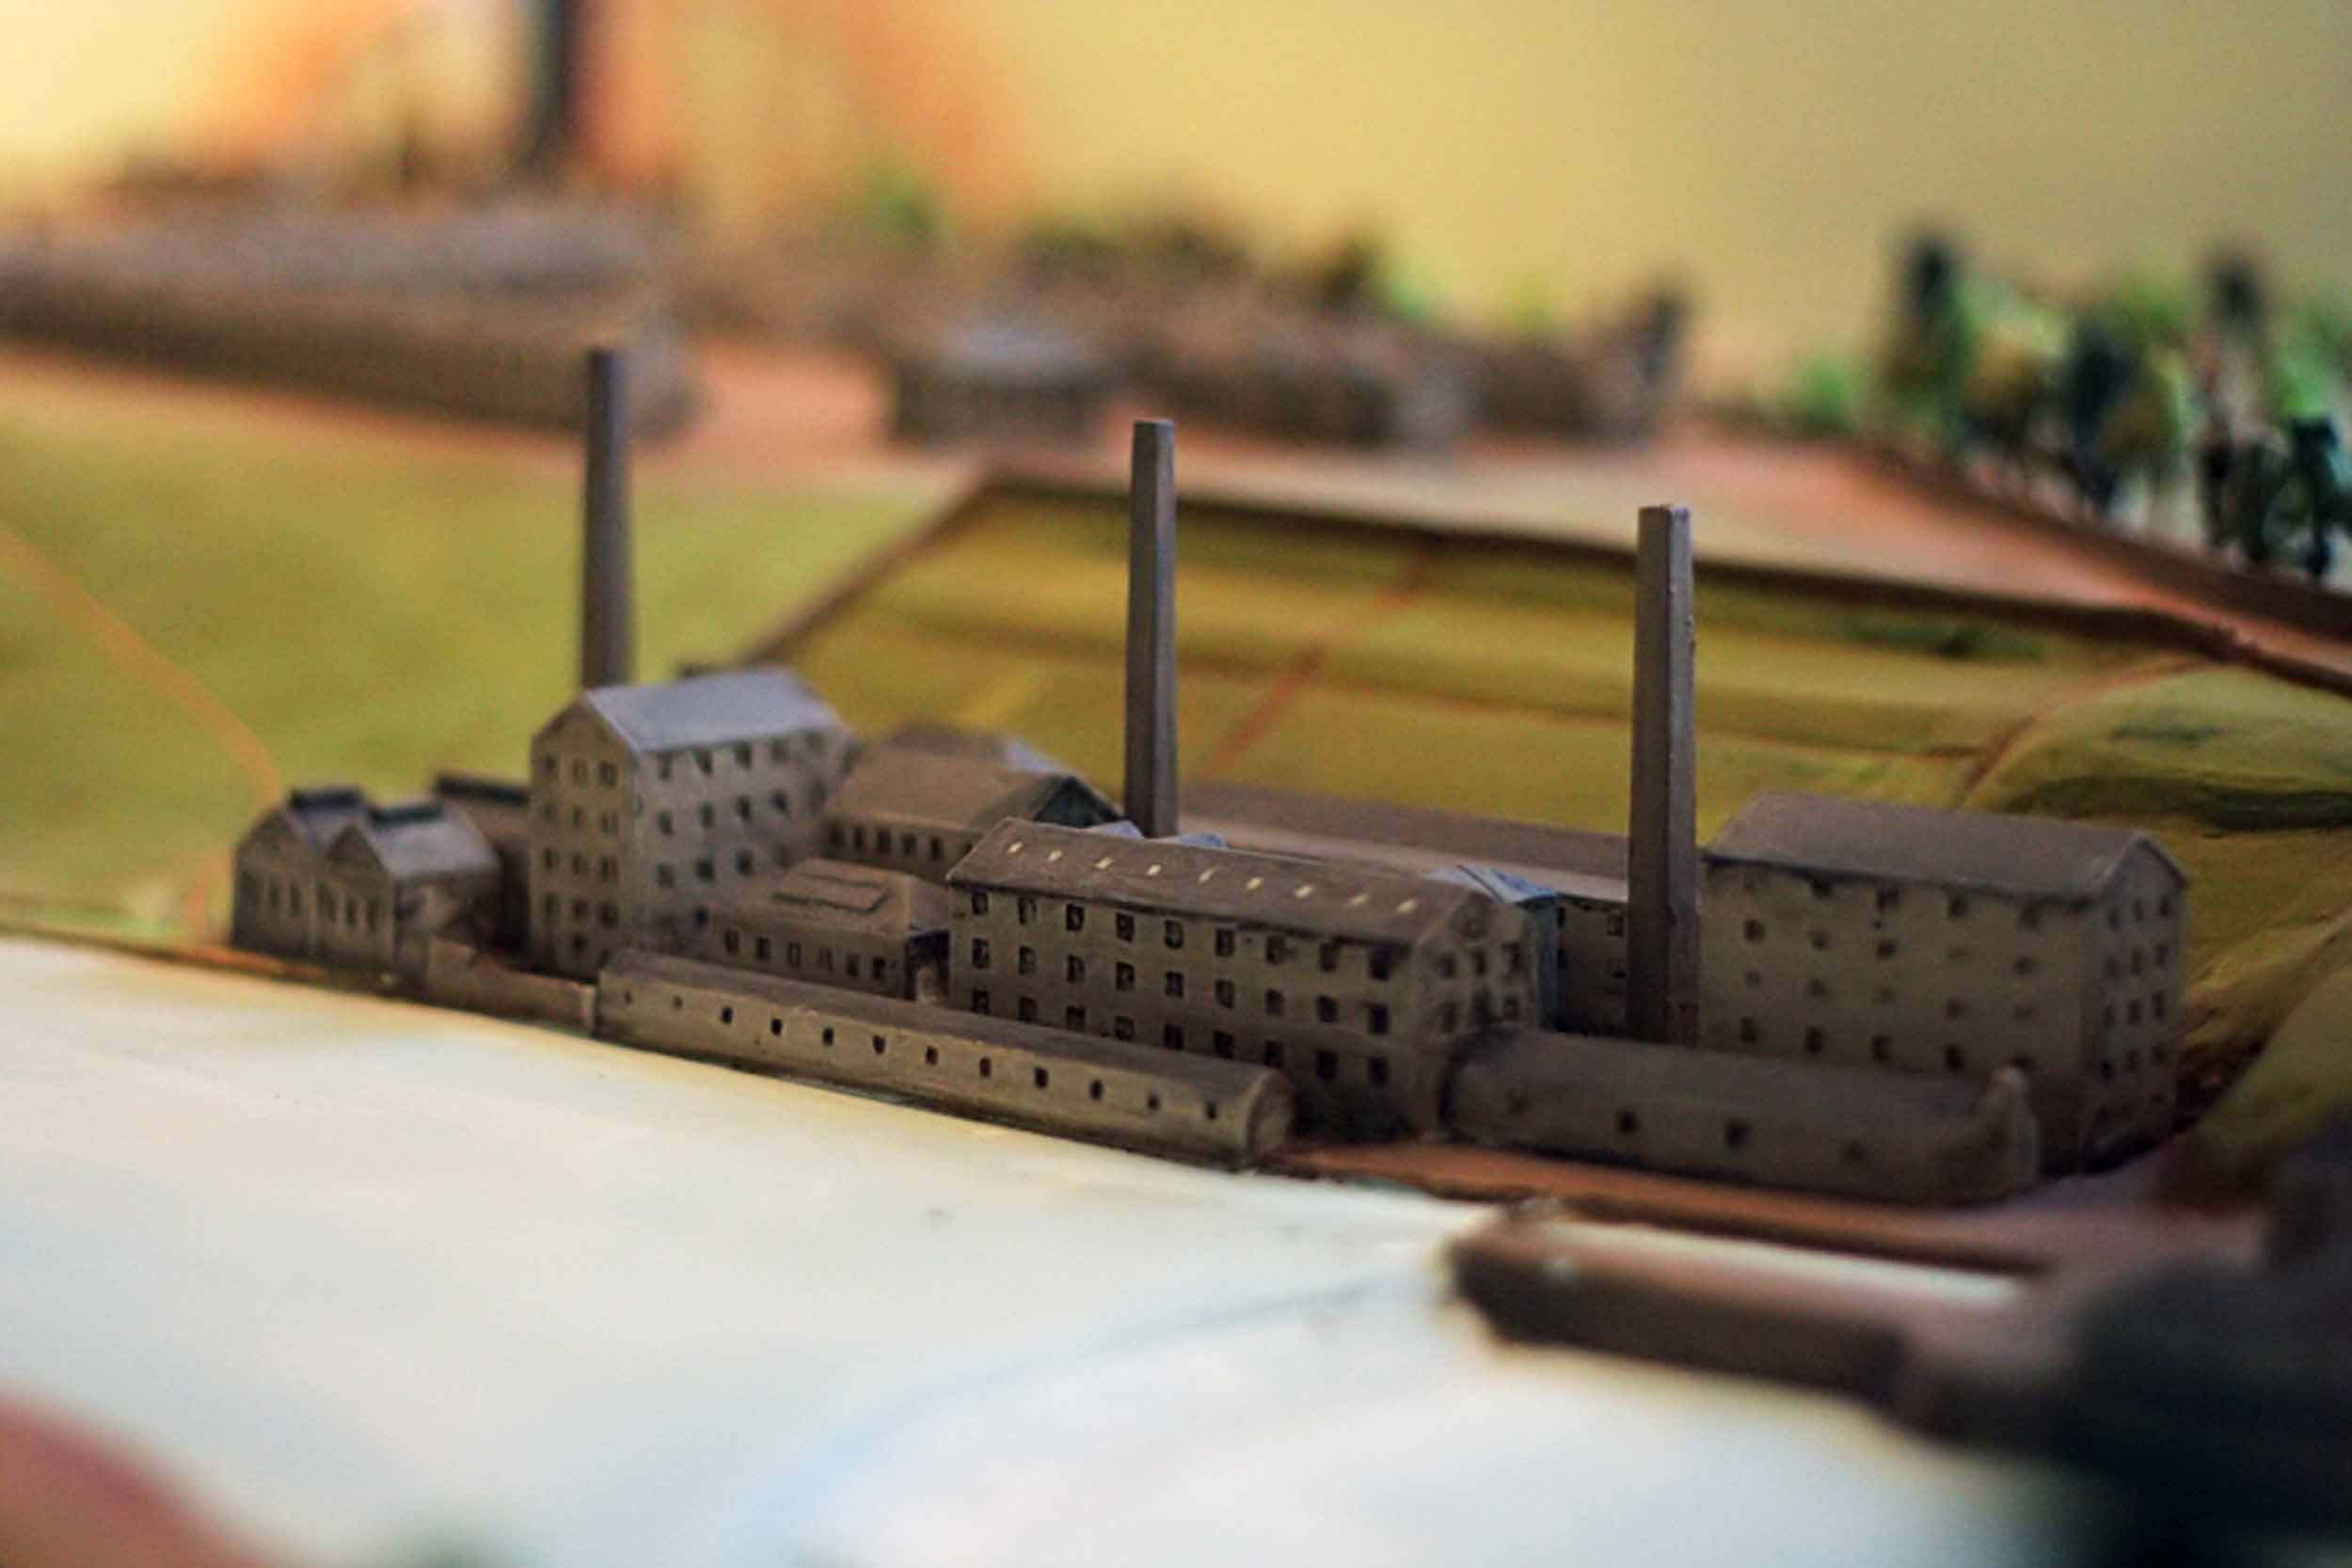 Model of the Blantyre Mill, detail, by Pilkington Jackson. Copyright Livingstone Online. May not be reproduced without the express written consent of the National Trust for Scotland, on behalf of the Scottish National Memorial to David Livingstone Trust (David Livingstone Centre).